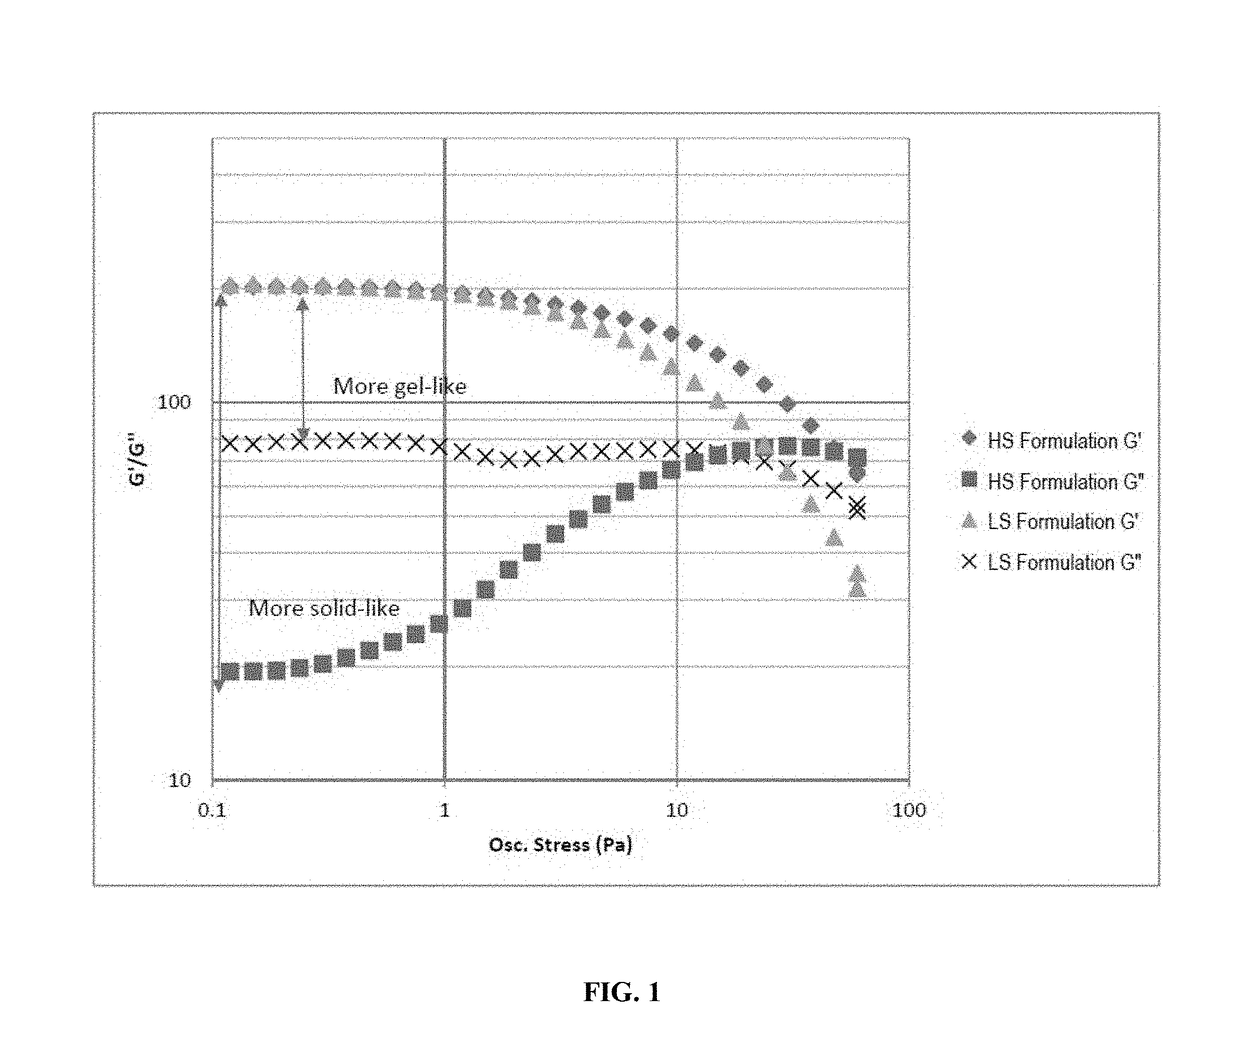 Stable unit dose compositions with high water content and structured surfactants